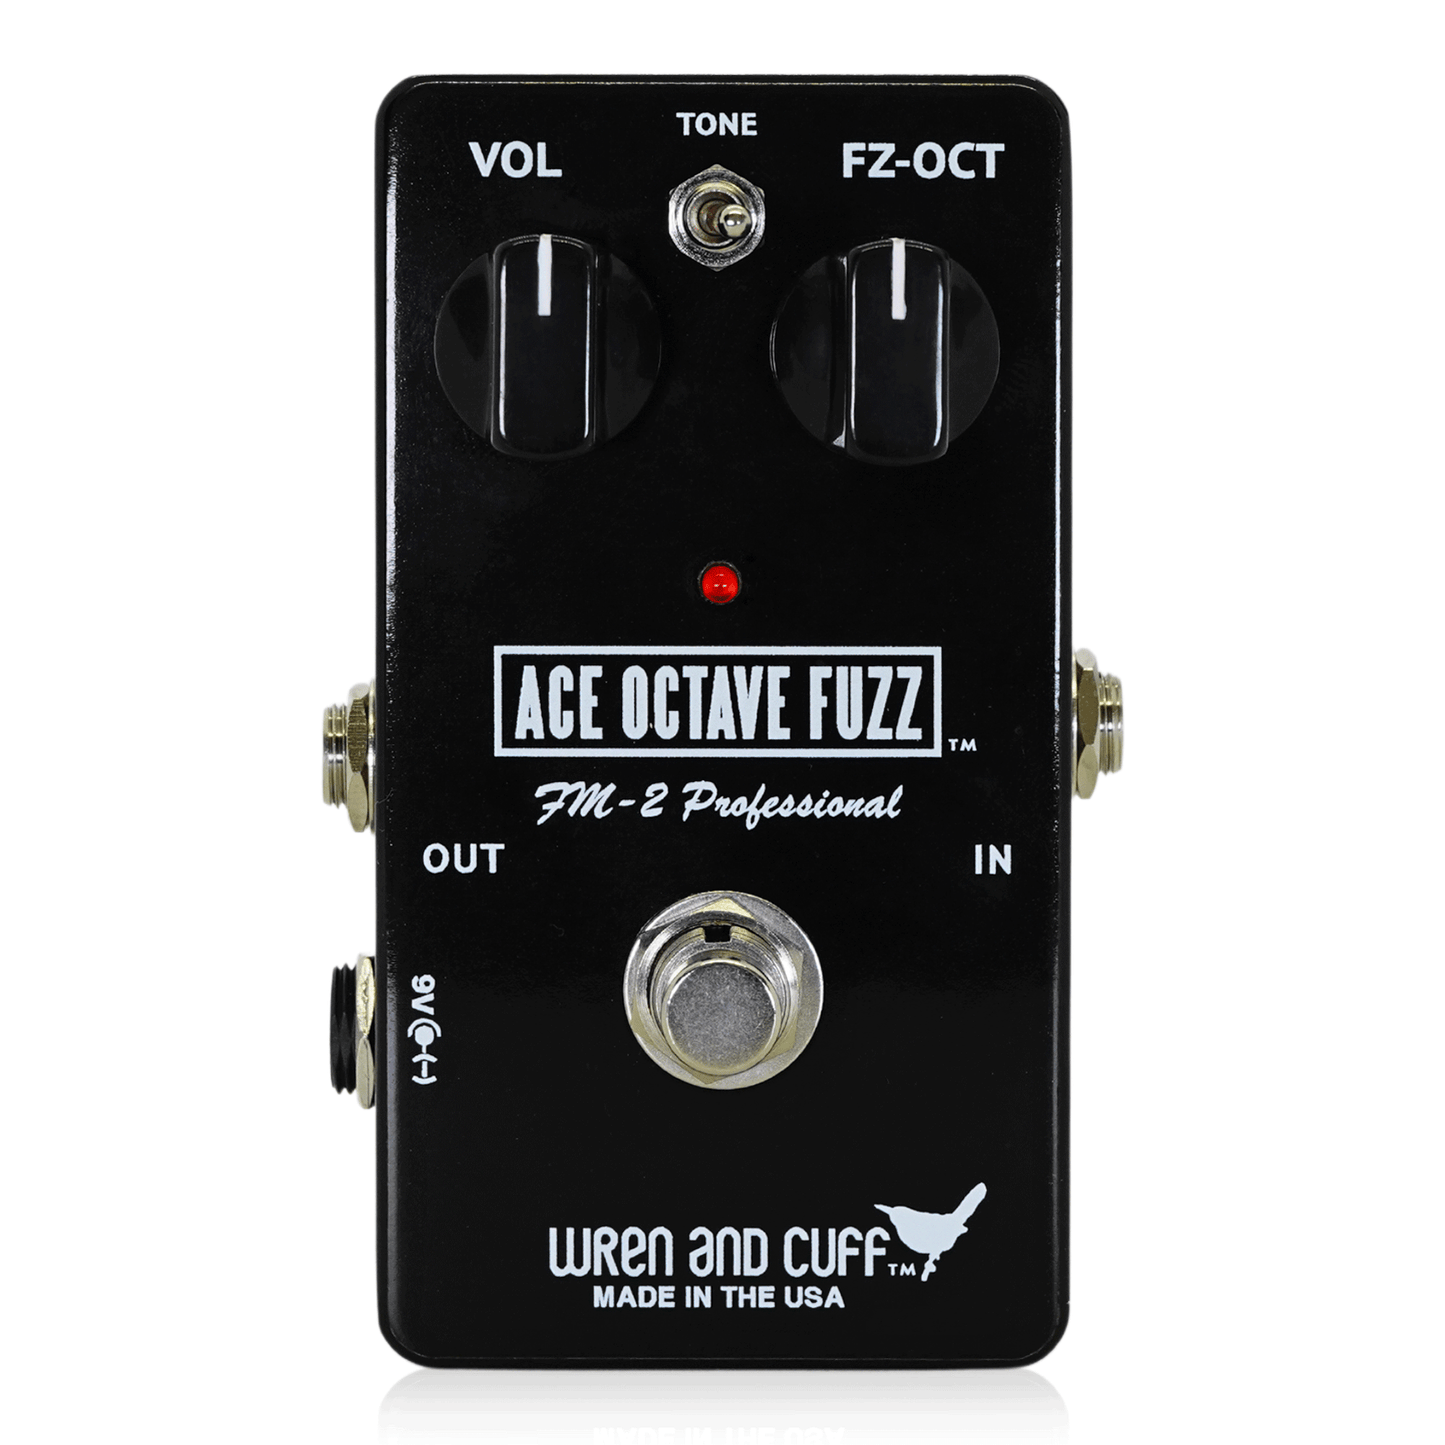 Wren and Cuff/Ace Octave Fuzz